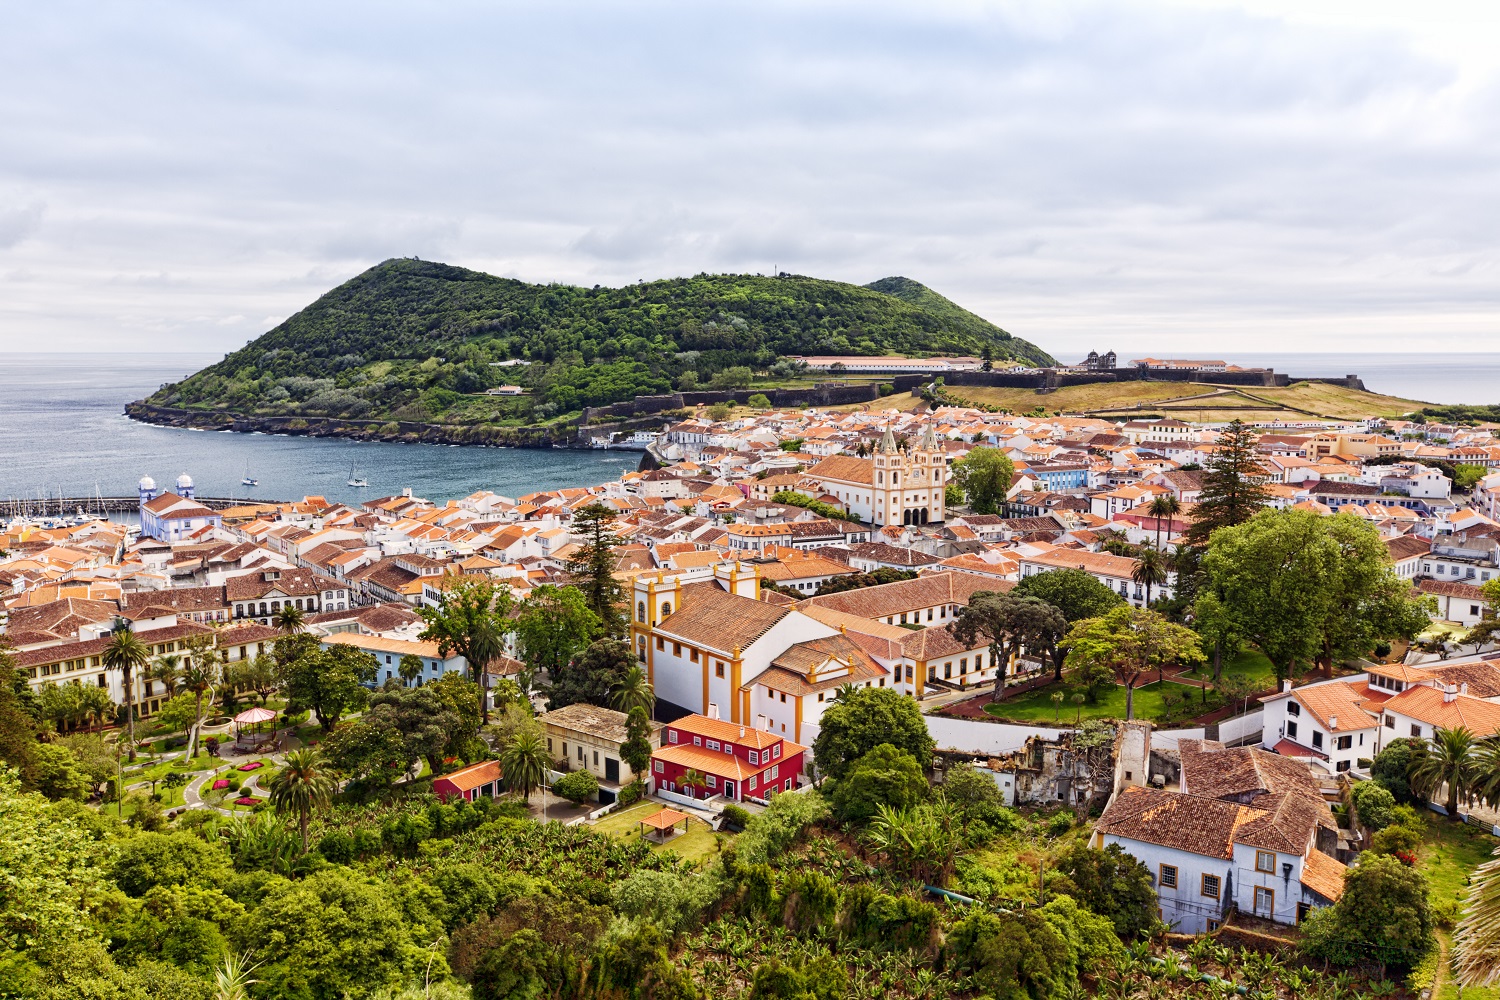 View of the city of Angra do Heroismo with Mount Brazil on Terceira Island